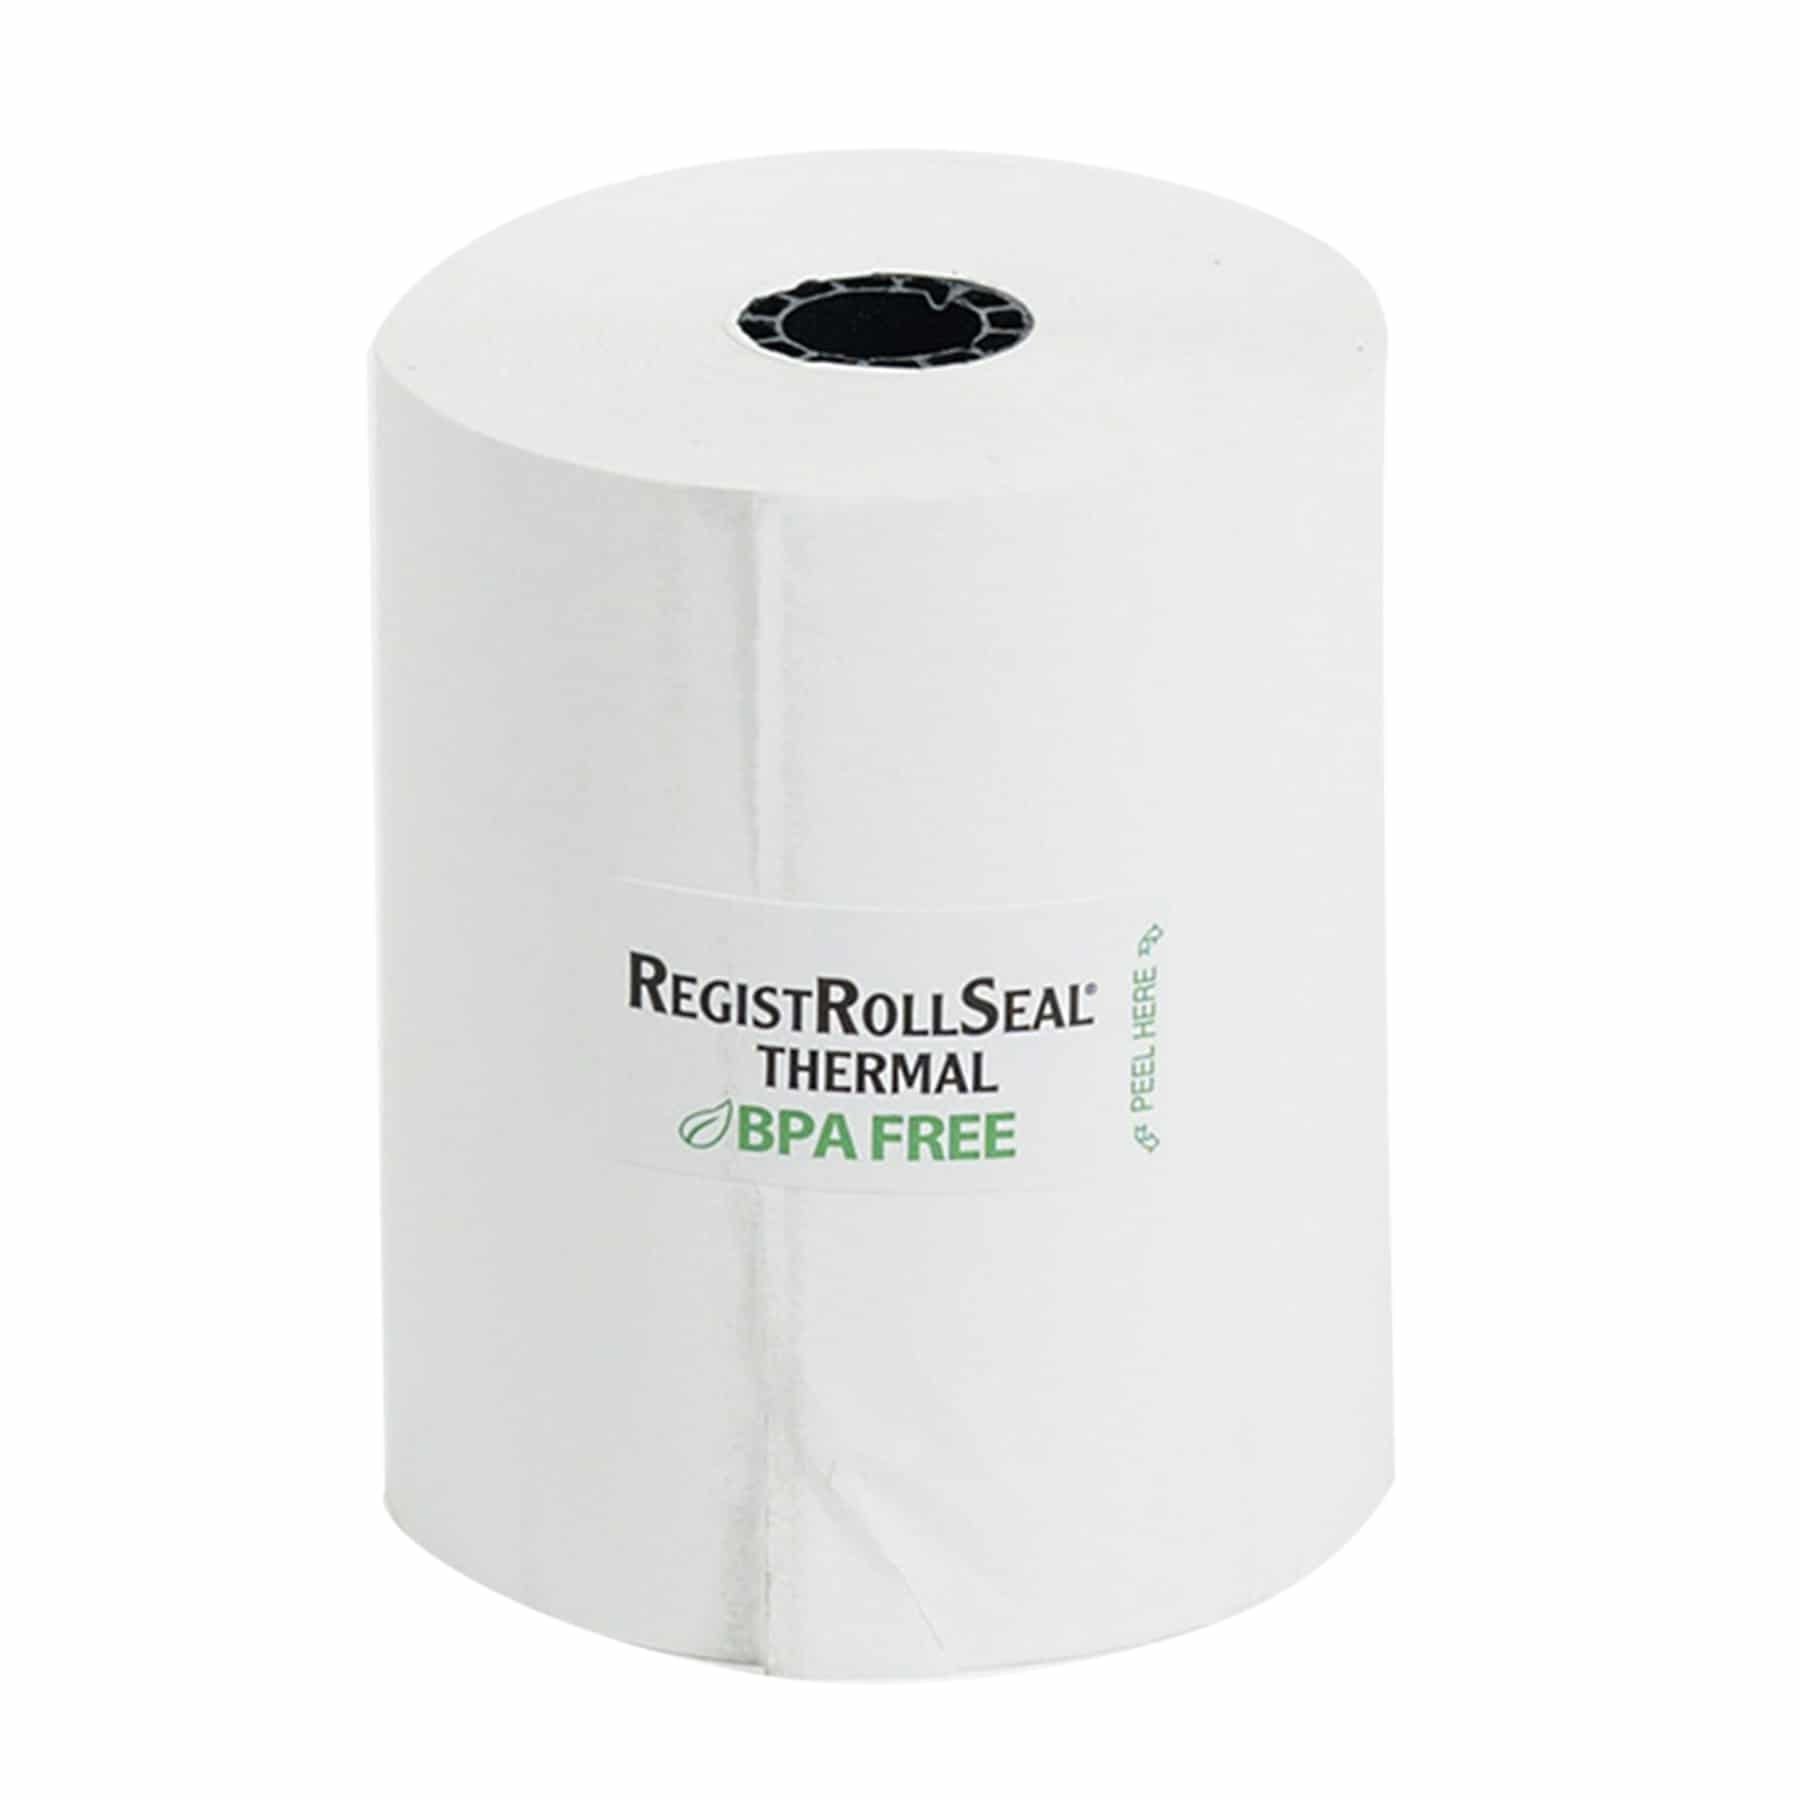 20 Roll Continuous Paper Label RDM01U5 for Brother RJ-3050 4030 4"x115 5/16 ft